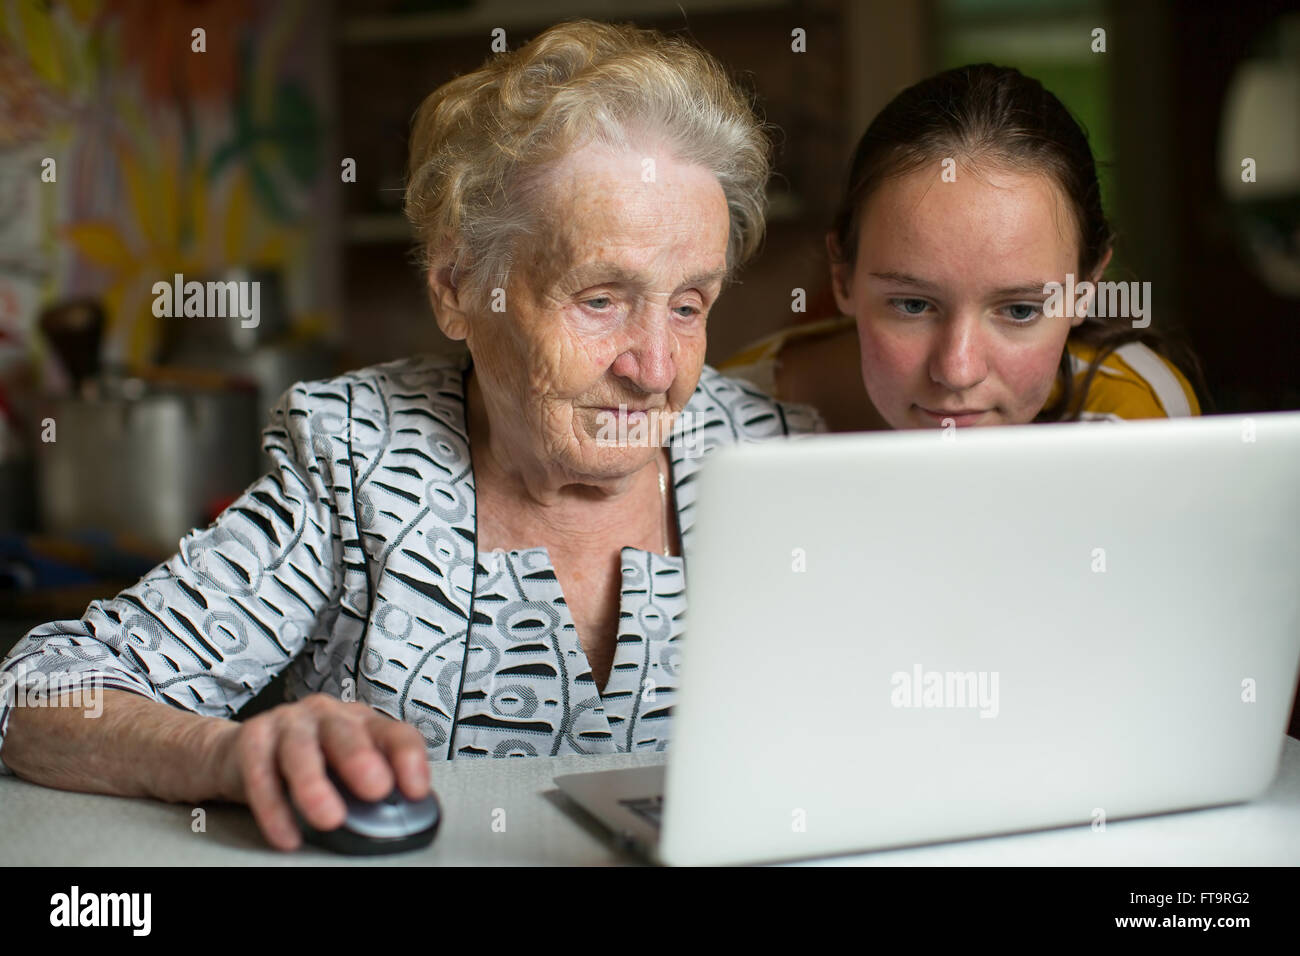 Elderly woman with her granddaughter working on laptop. Stock Photo